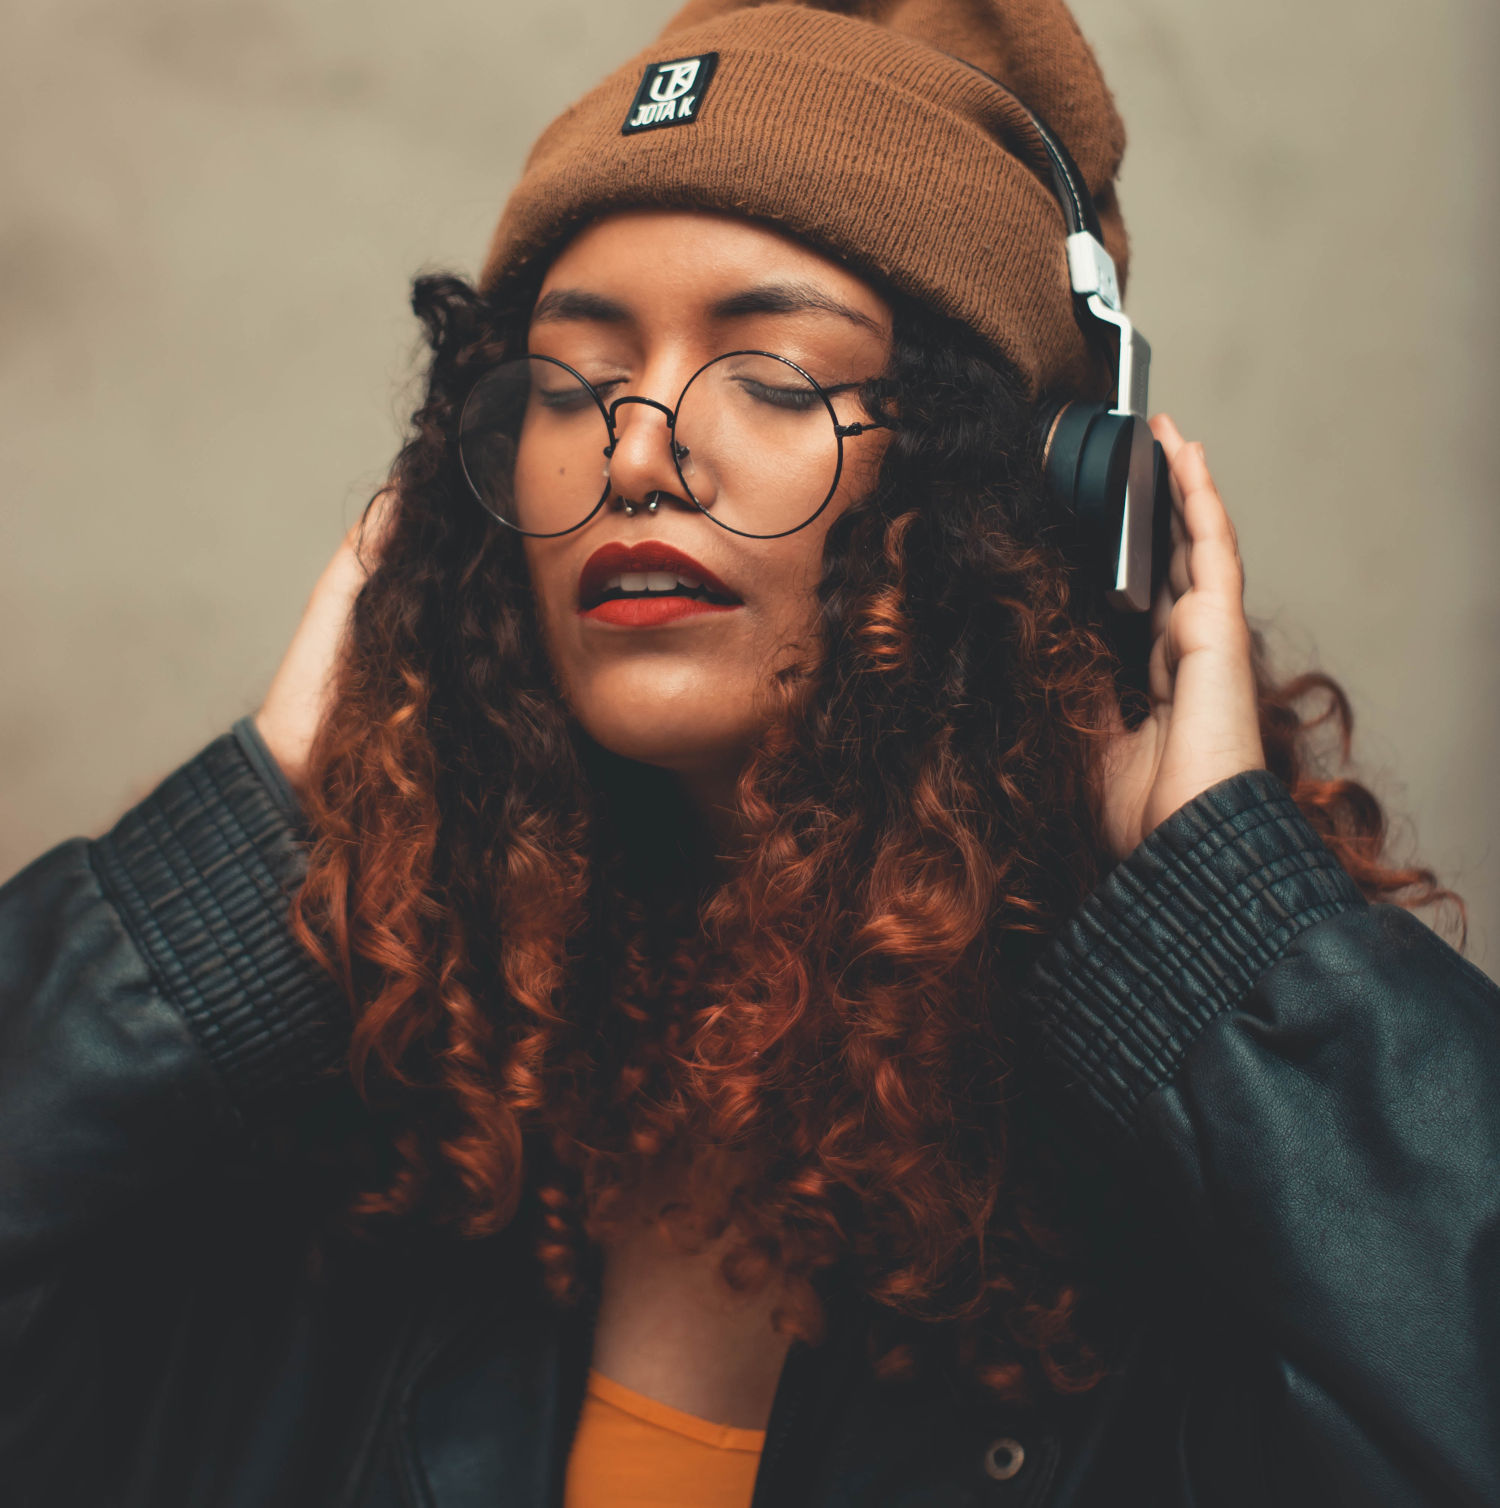 Person wearing a brown beanie listening intently through headphones, hands on the phones